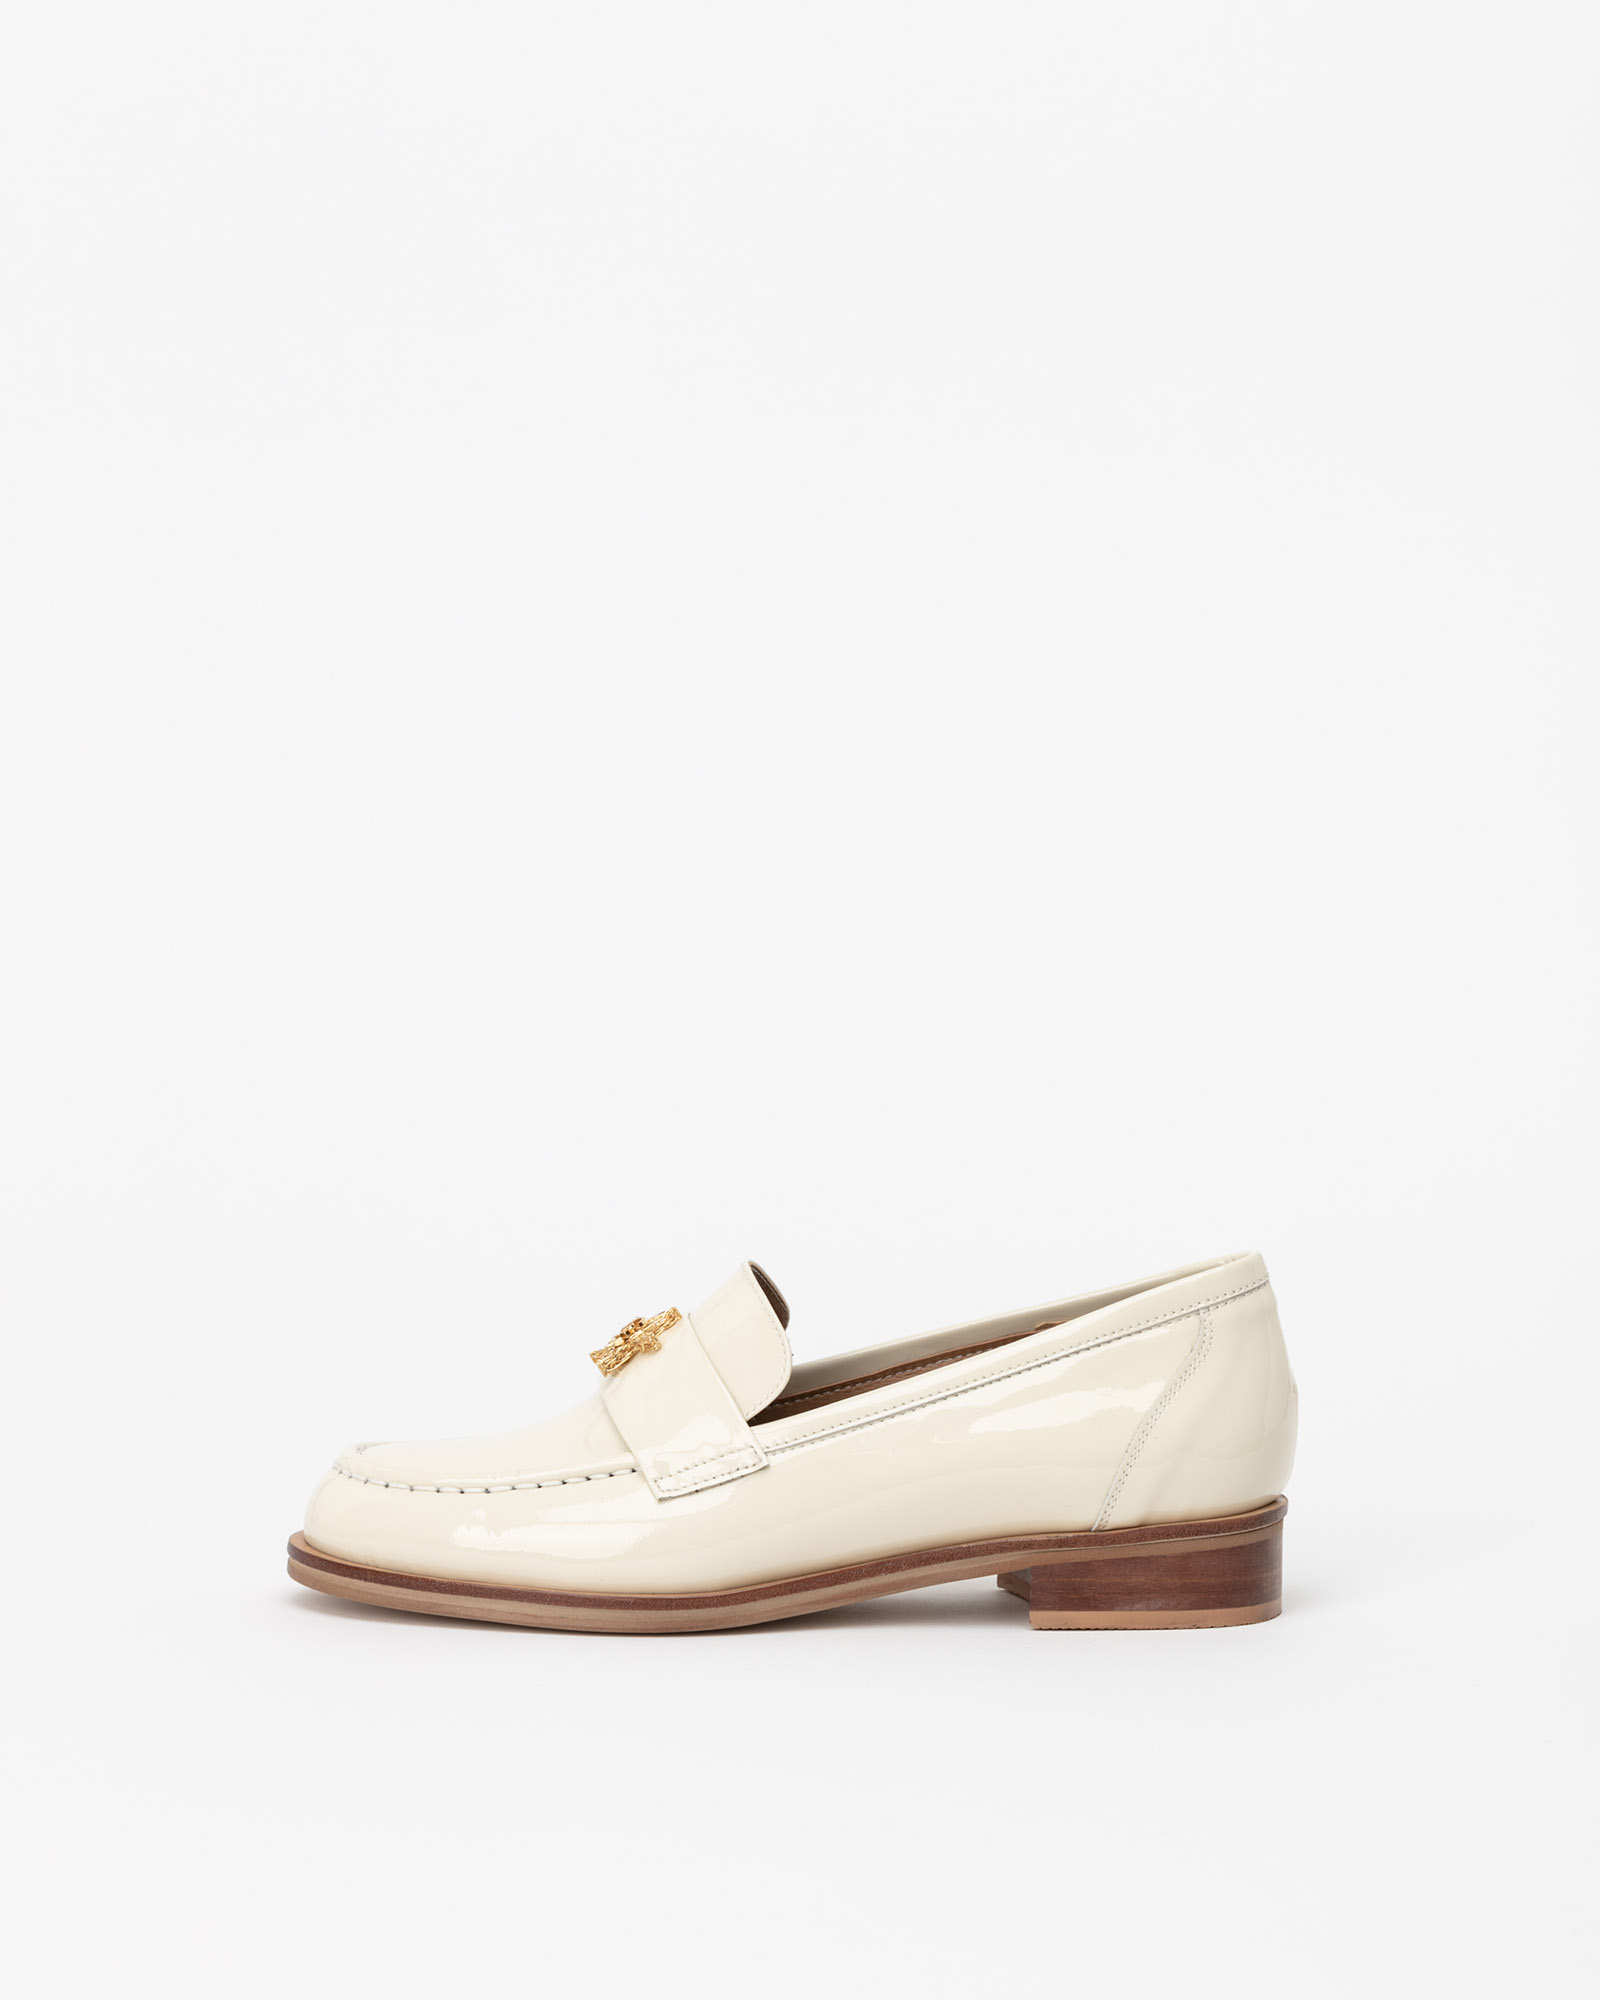 Shootingstar Loafers in Ivory Patent